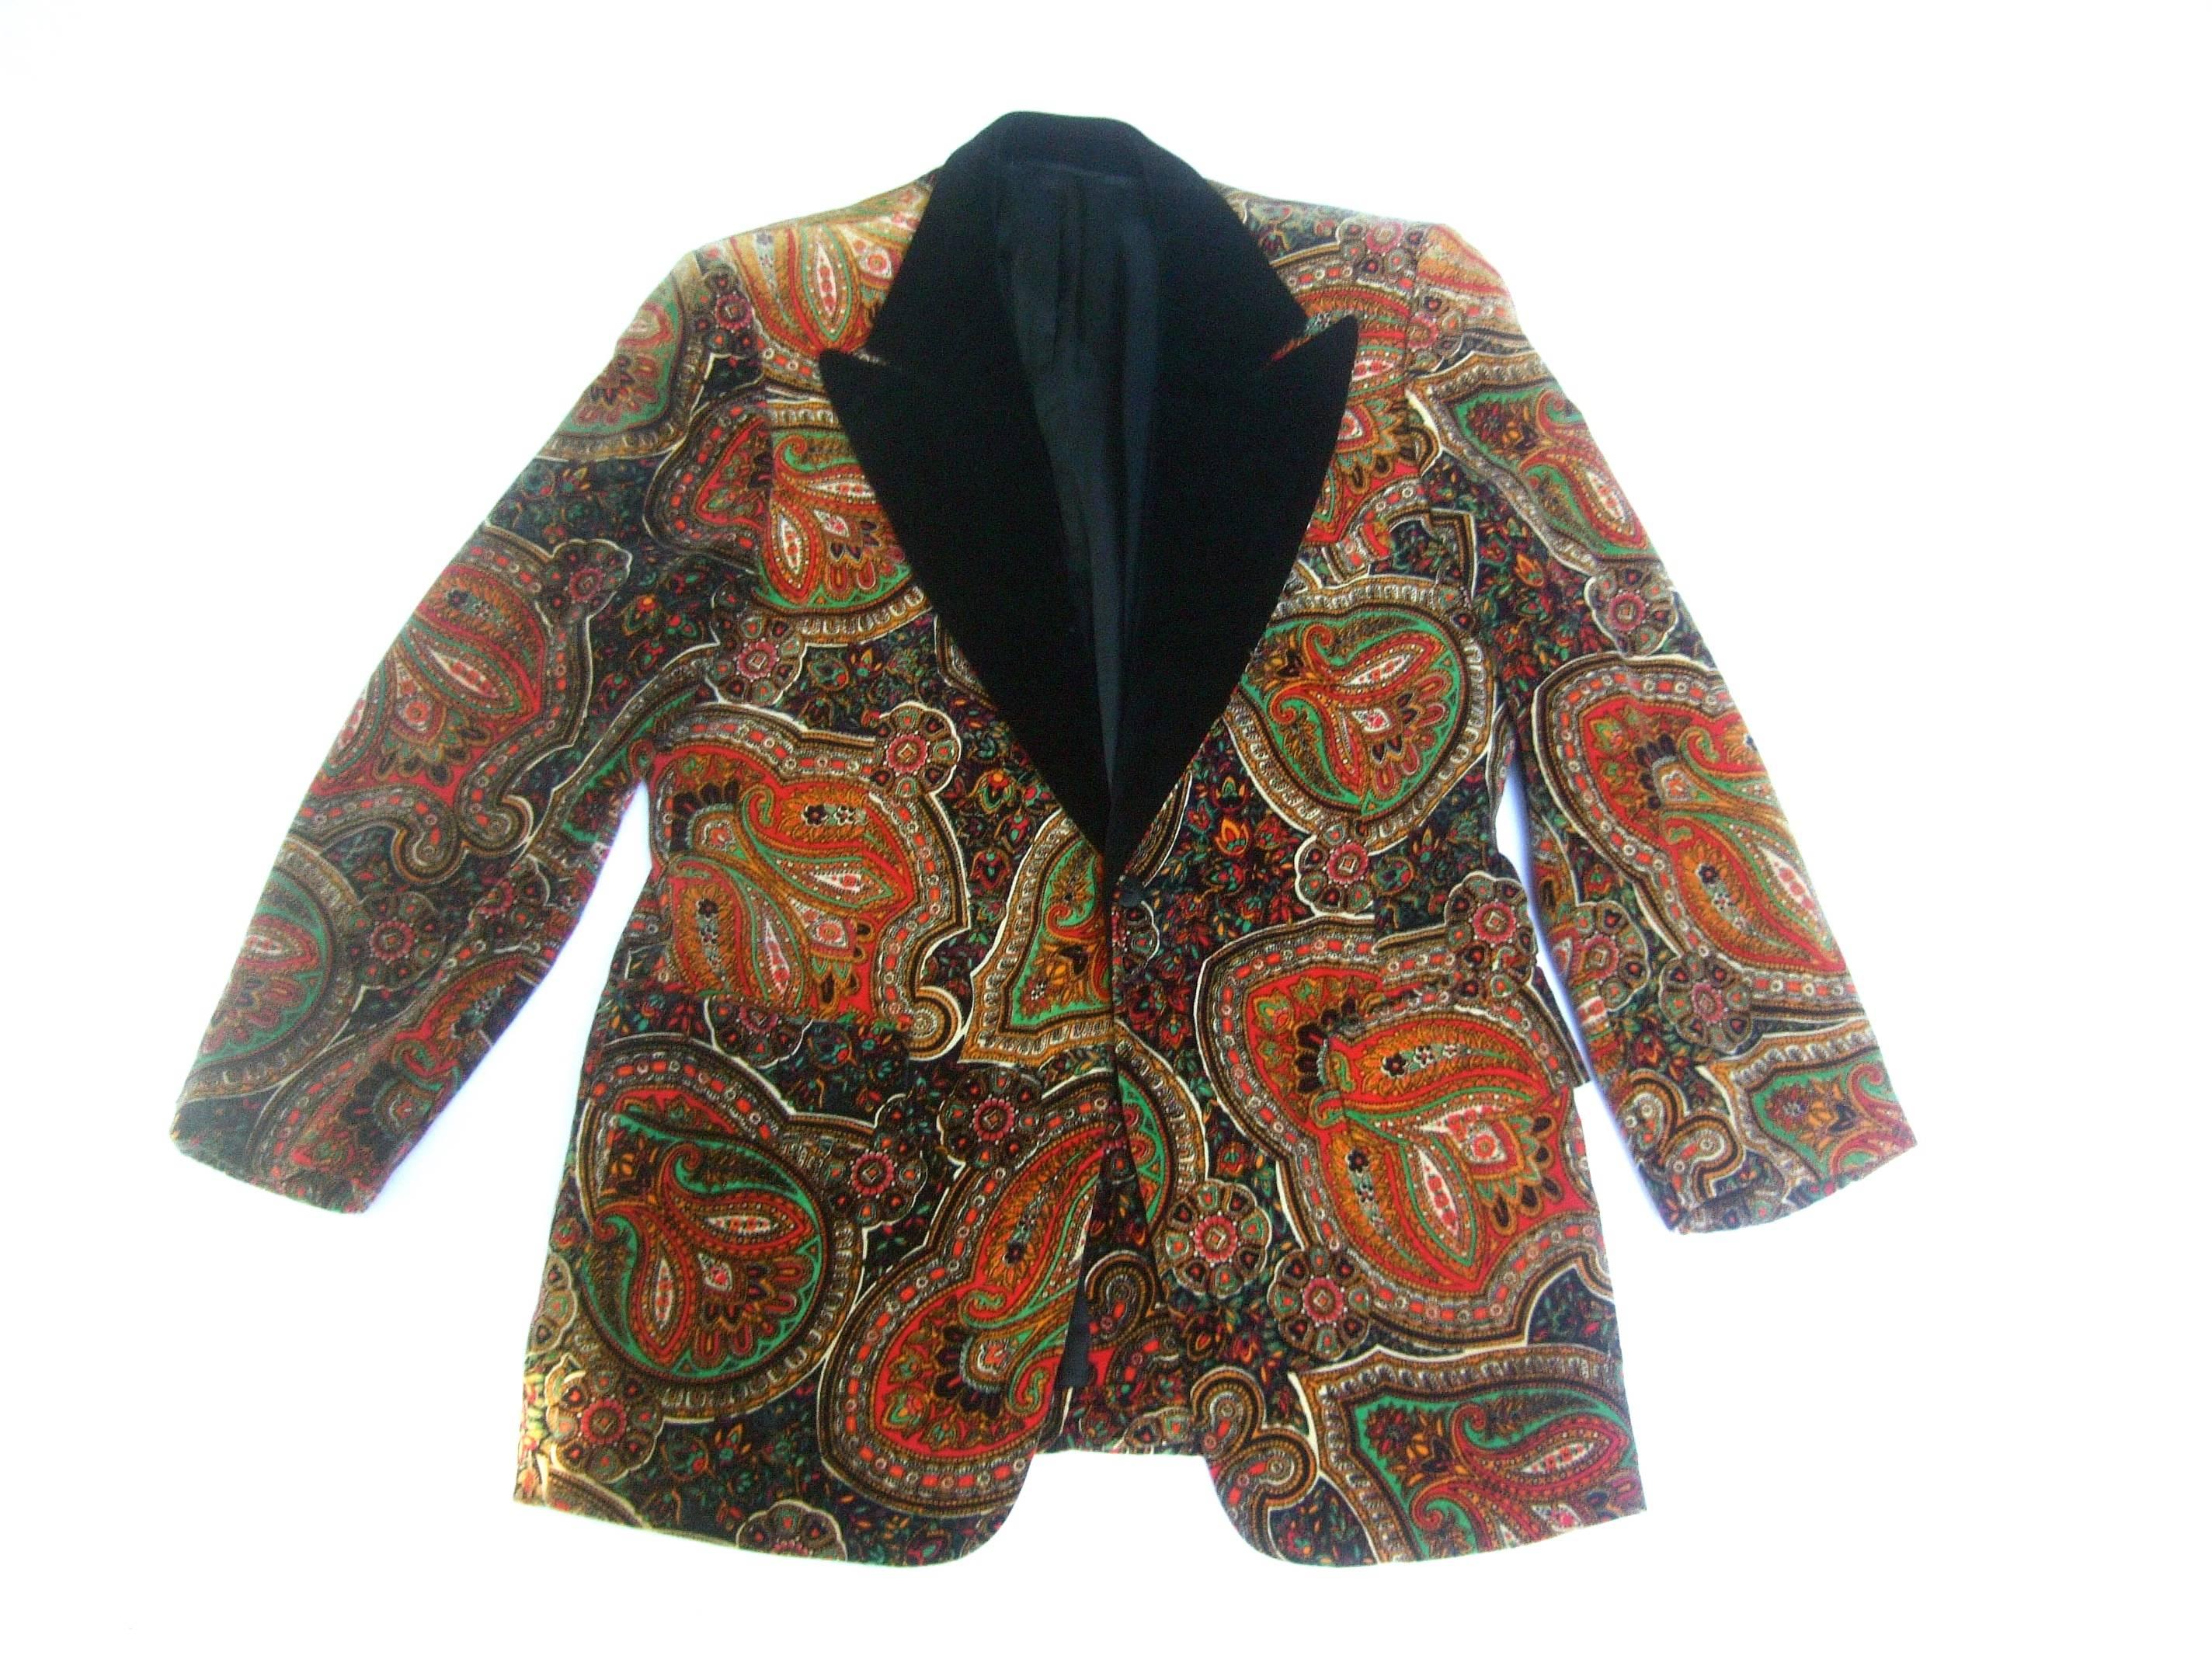 Men's Paisley cotton velvet formal jacket c 1970s
The stylish retro tuxedo style jacket is designed 
with plush cotton velvet. Accented with black
velvet lapels 

Makes an unique formal wear garment;
perfect for holidays & special